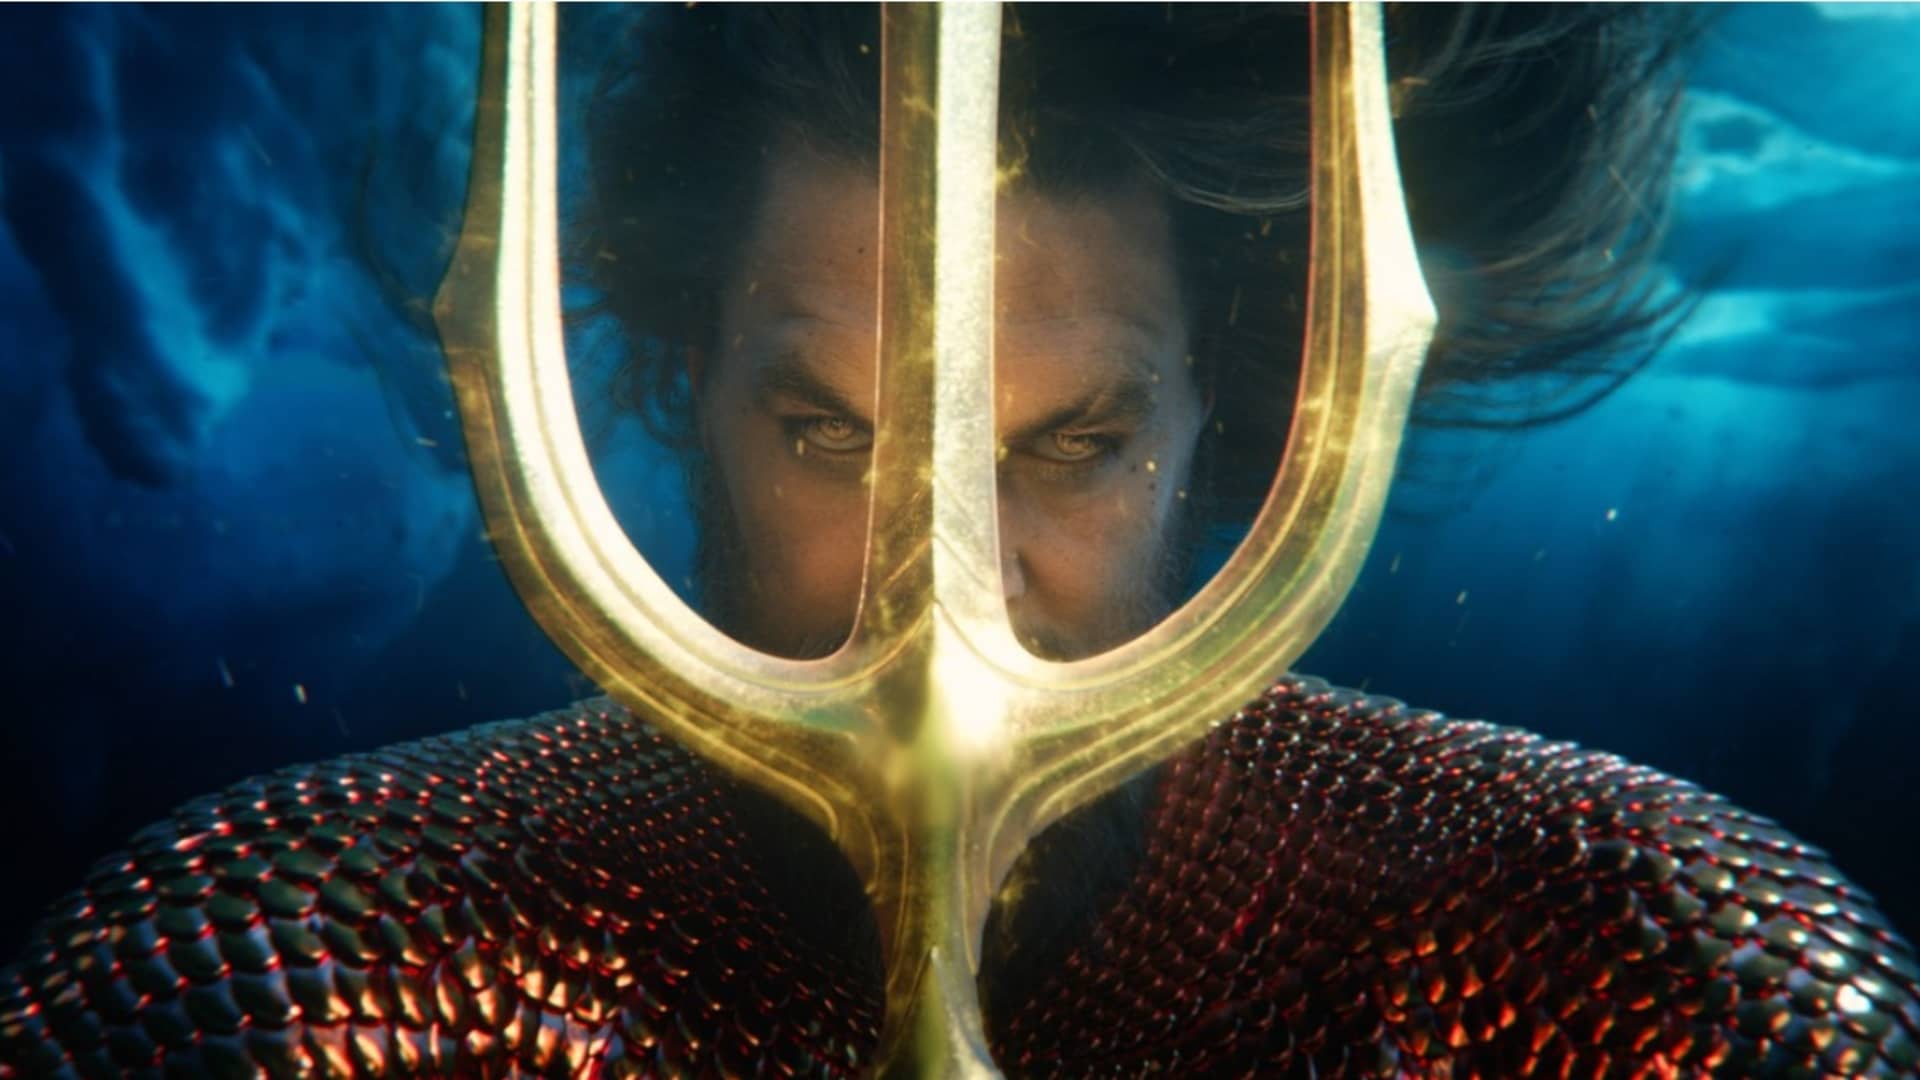 Aquaman and the Lost Kingdom marks end of era for DC